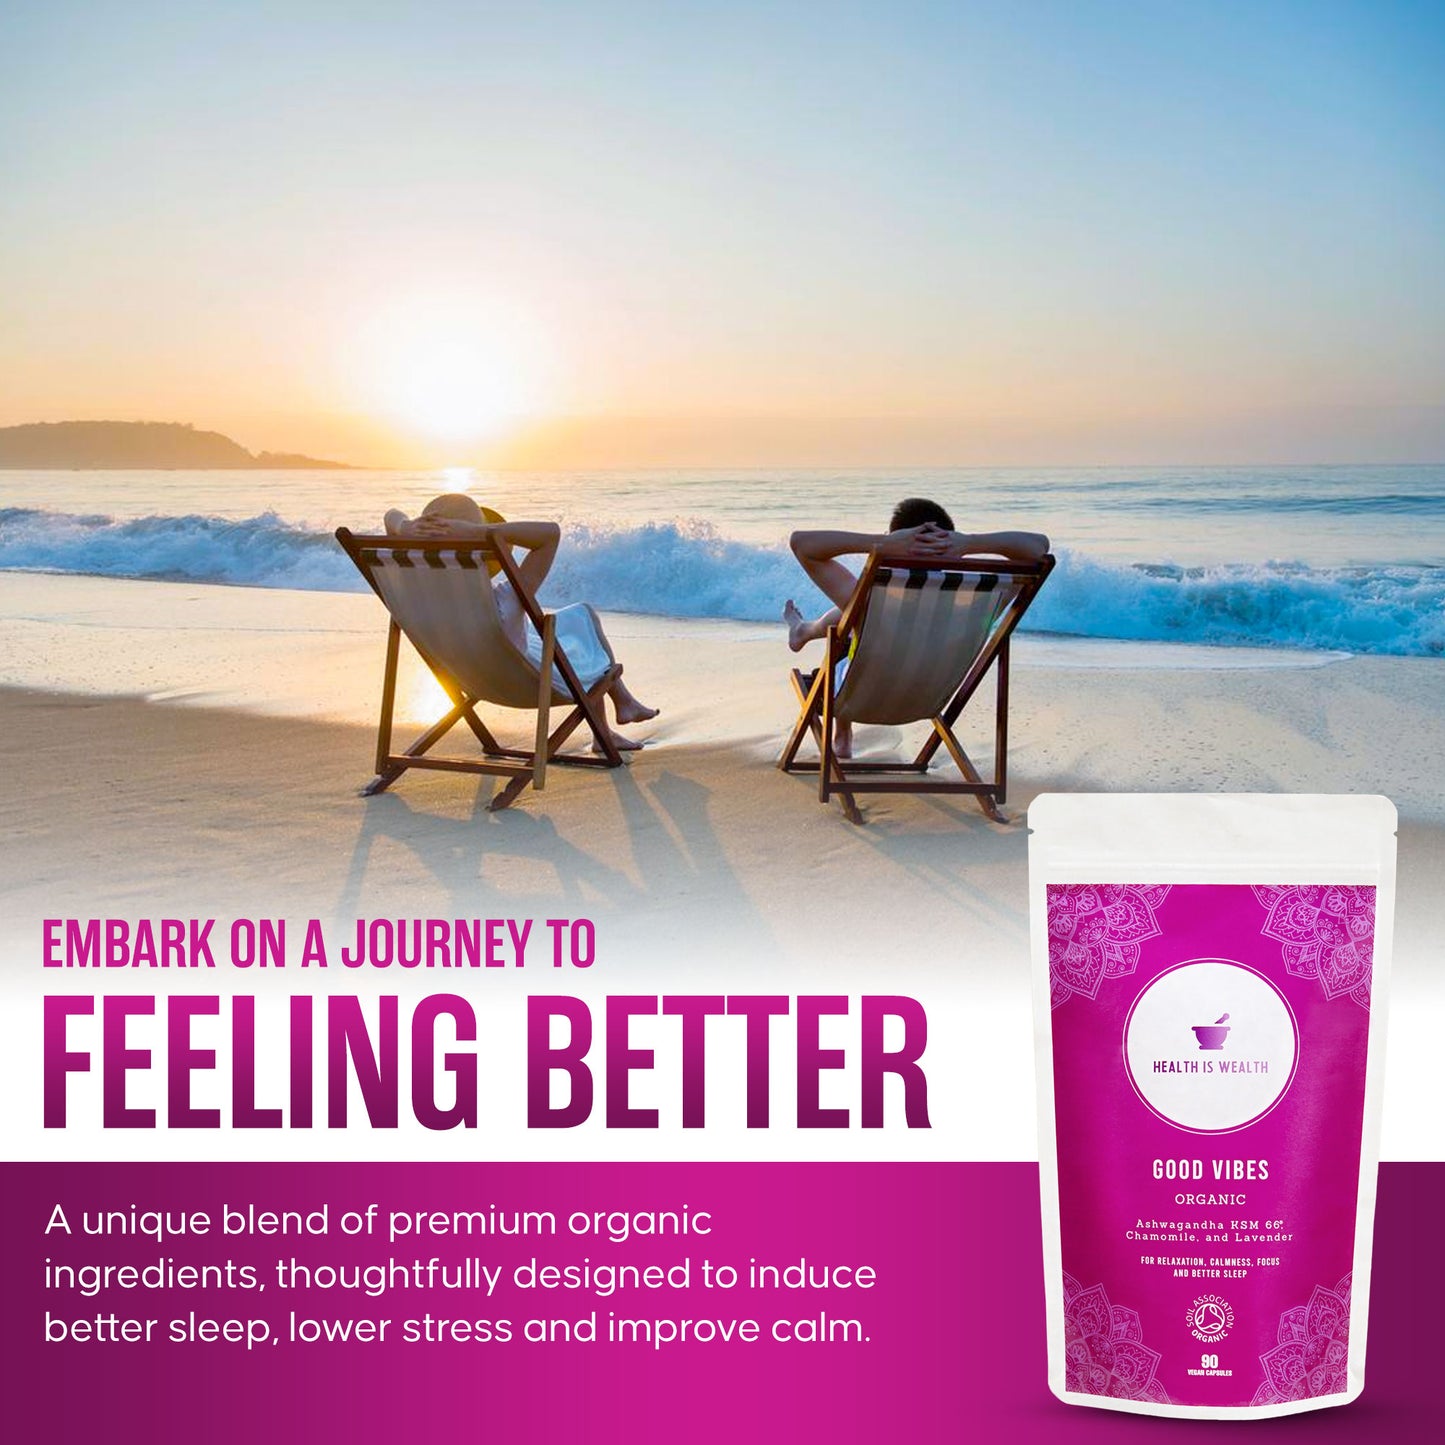 
                  
                    The image depicts a serene beach scene at sunrise with two people lounging in chairs, paired with "Good Vibes - Natural Stress Relief Supplement" packaging. It promotes the organic stress management supplement as a means to better sleep, stress reduction, and improved calmness, capturing the essence of a relaxed and balanced lifestyle.
                  
                